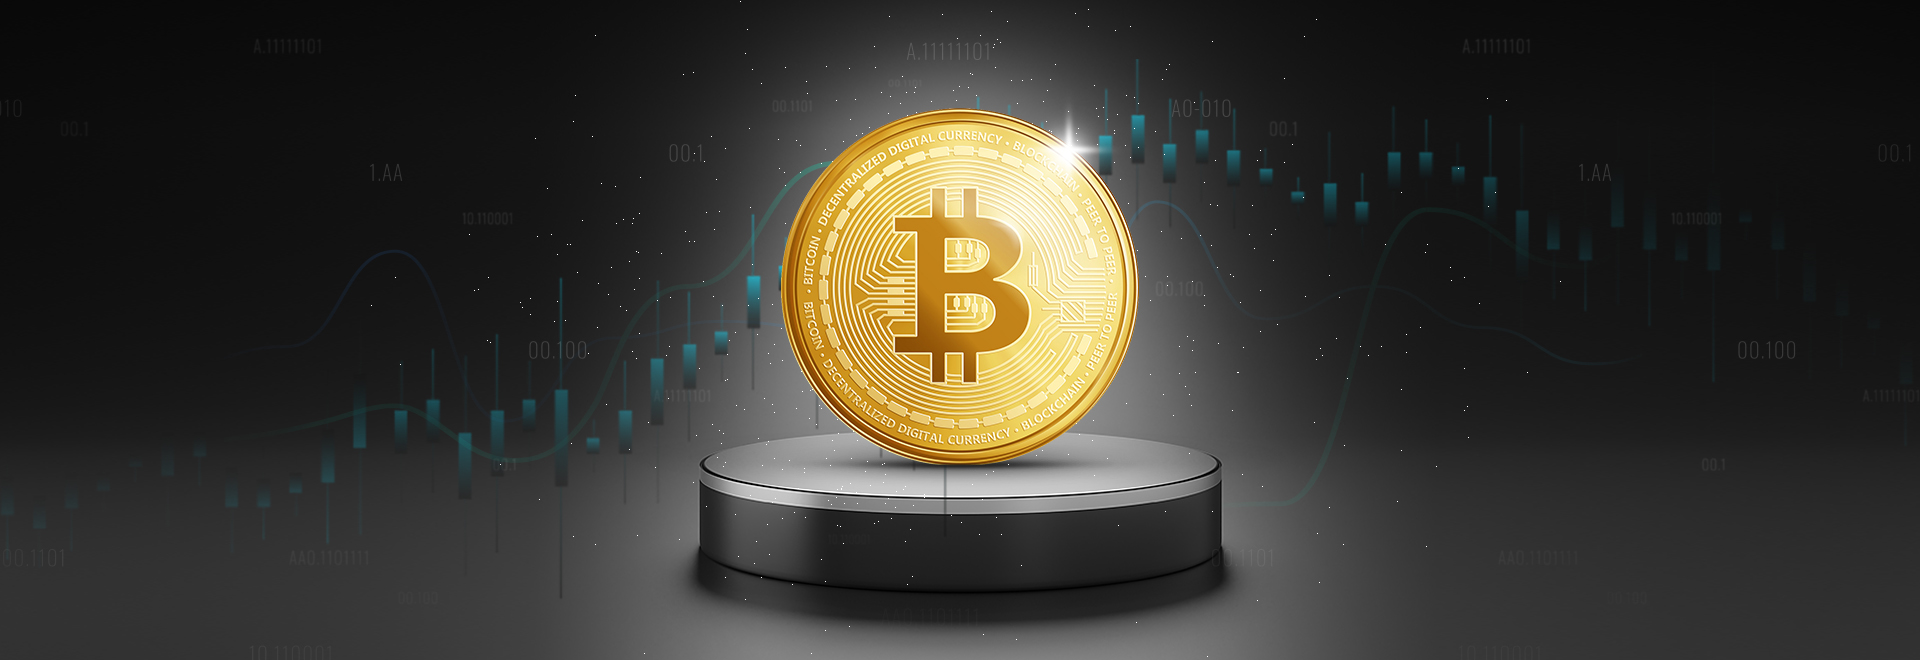 Bitcoin Gains Recognition Akin To Digital Gold